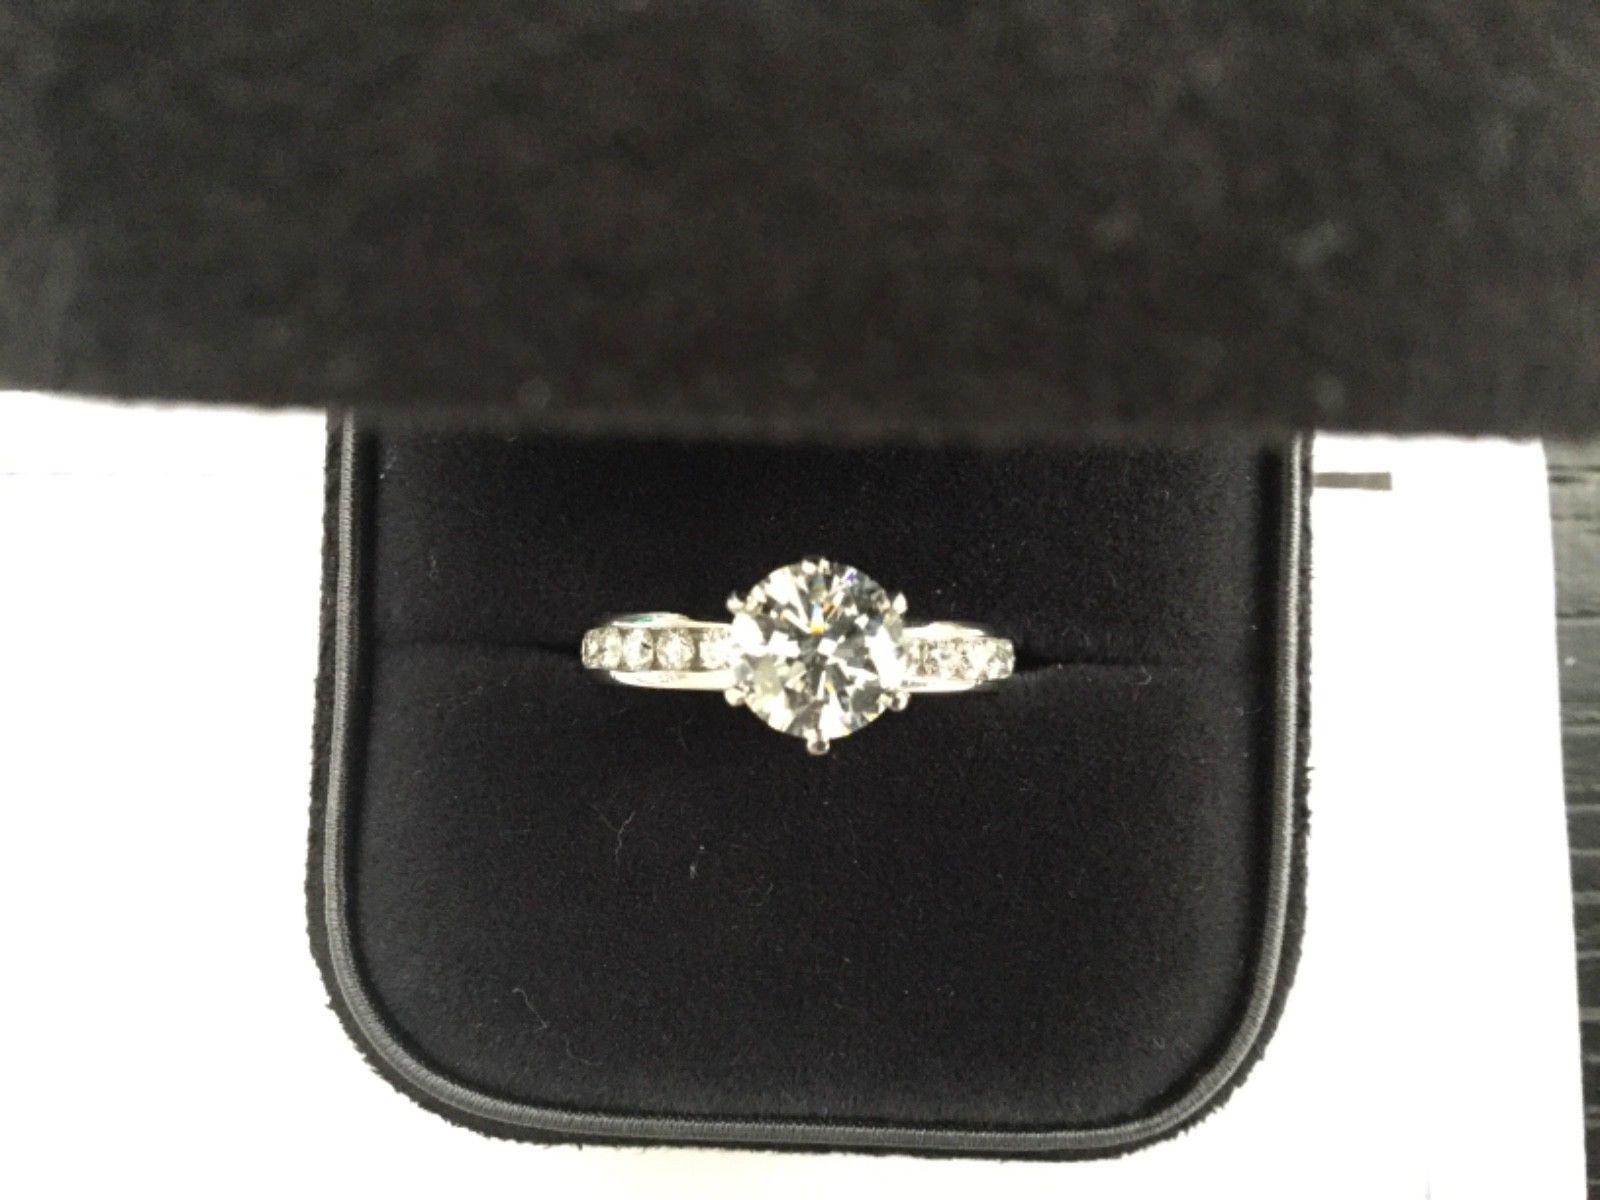 Being offered for your consideration is a like new classic Tiffany & Co Platinum and Diamond 1.24 carat natural Round engagement ring set in the classic channel set diamond band (TOTAL CARAT WEIGHT IS 1.57 carats)..  This ring was hardly worn and